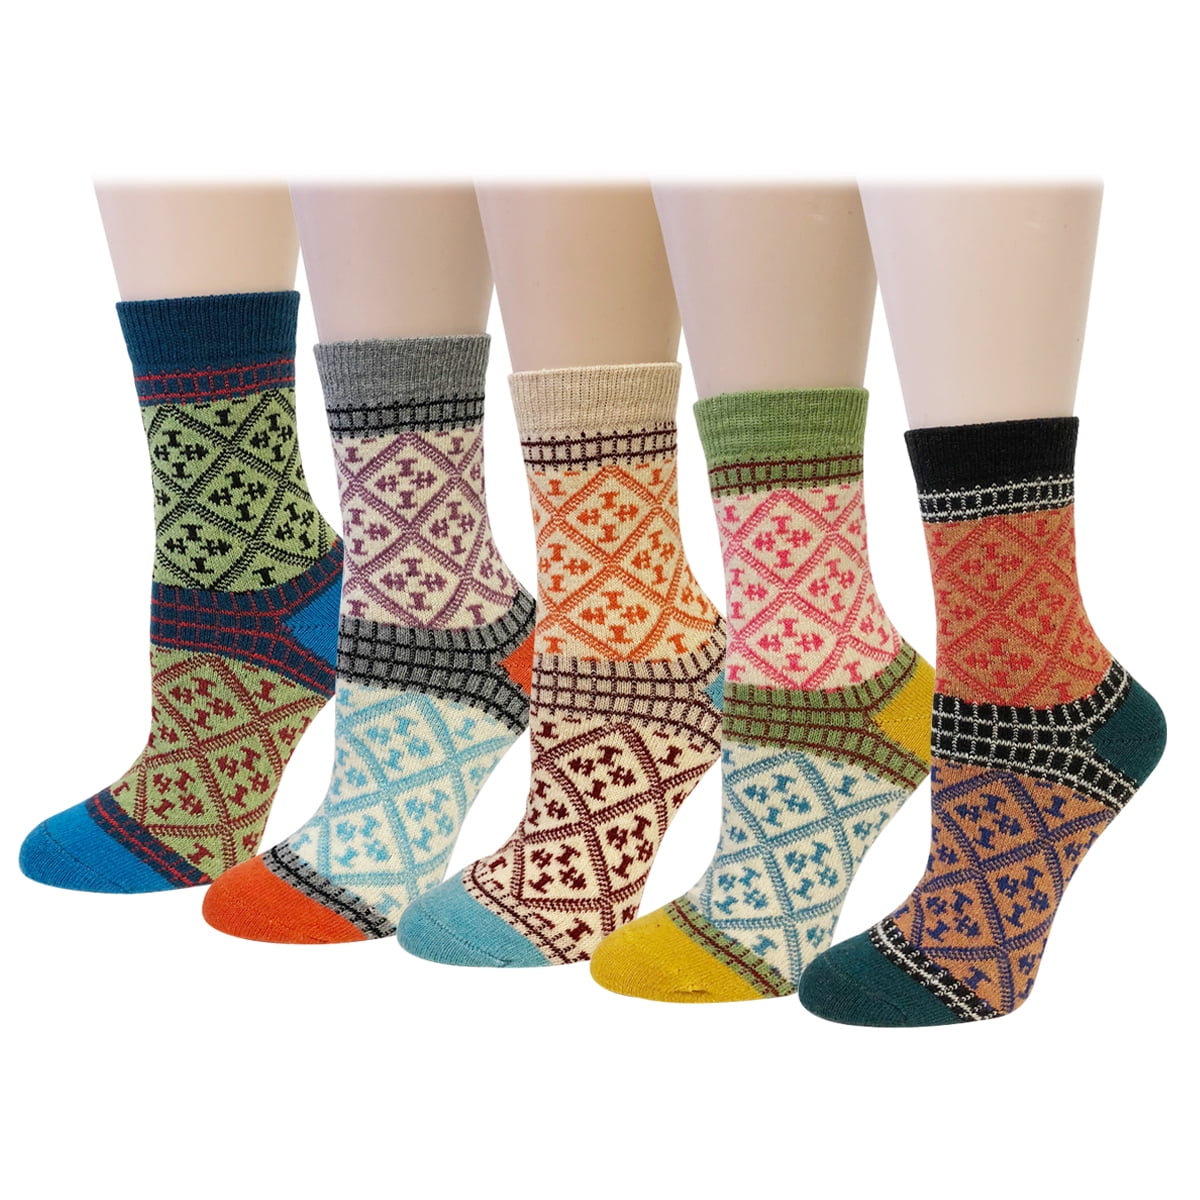 Wrapables® Women's Thick Winter Warm Wool Socks (Set of 5), Directions